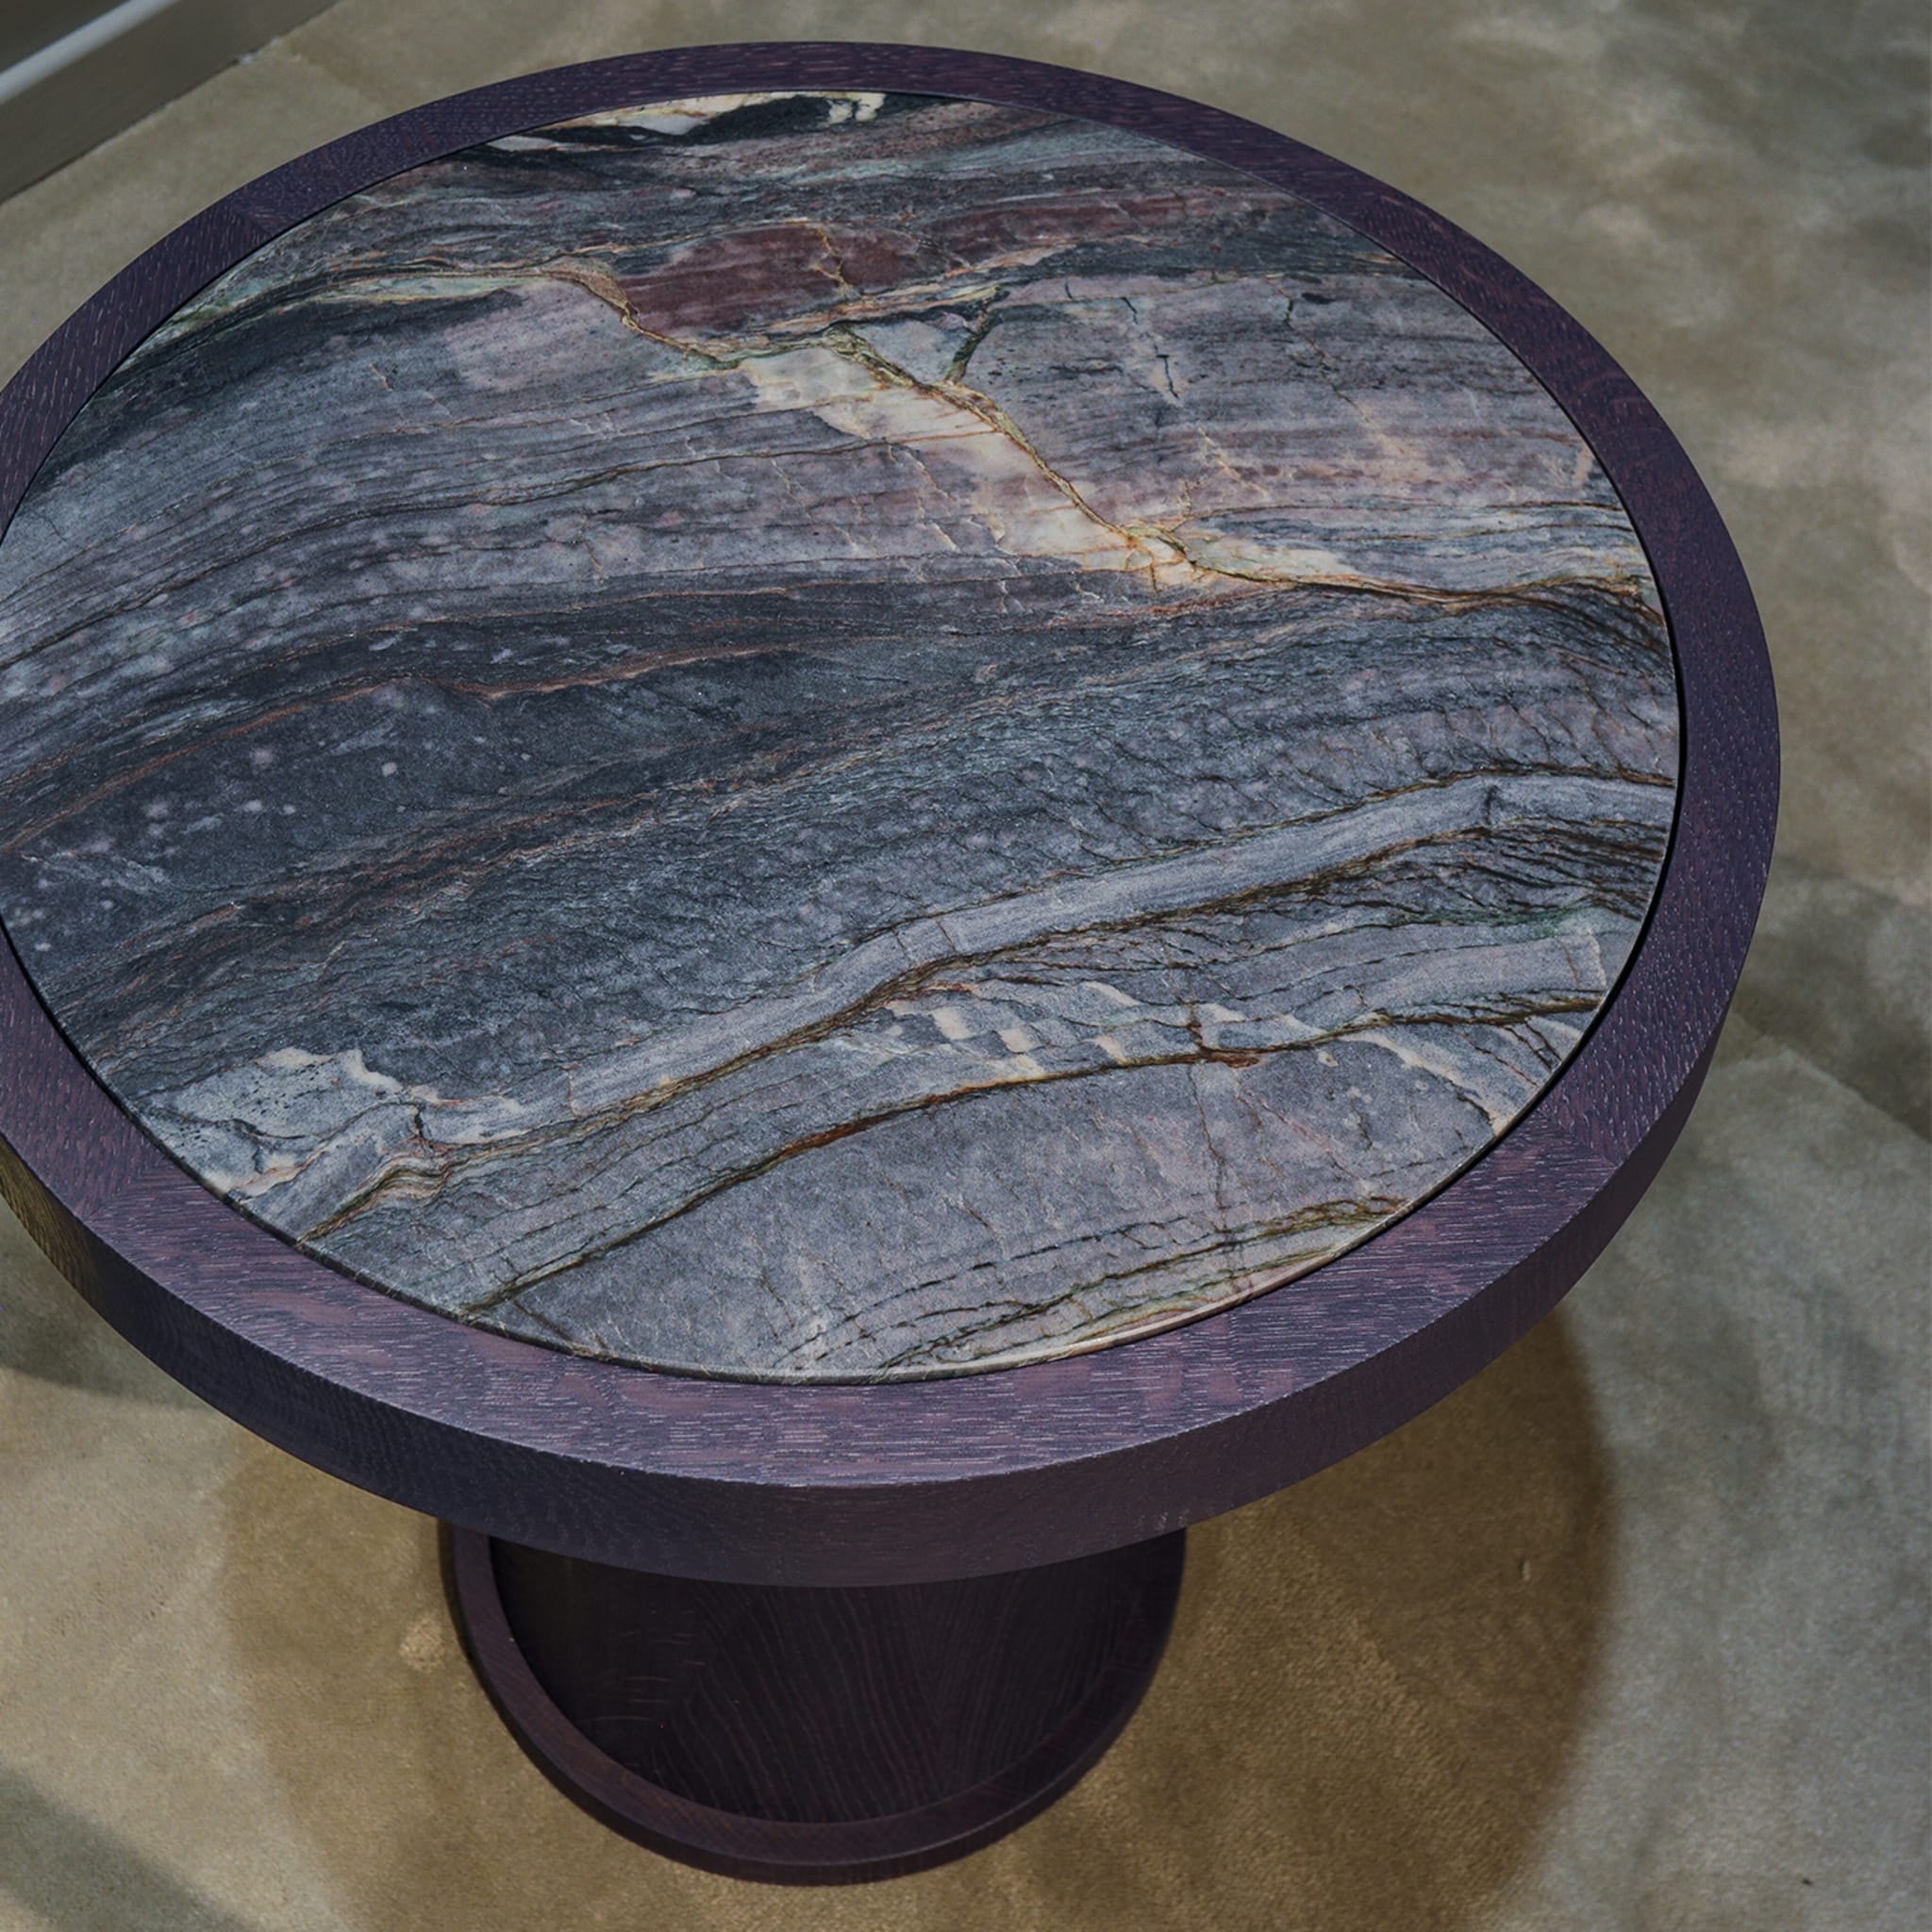 Rose Roundel Side Table by Archer Humphryes Architects - Alternative view 1